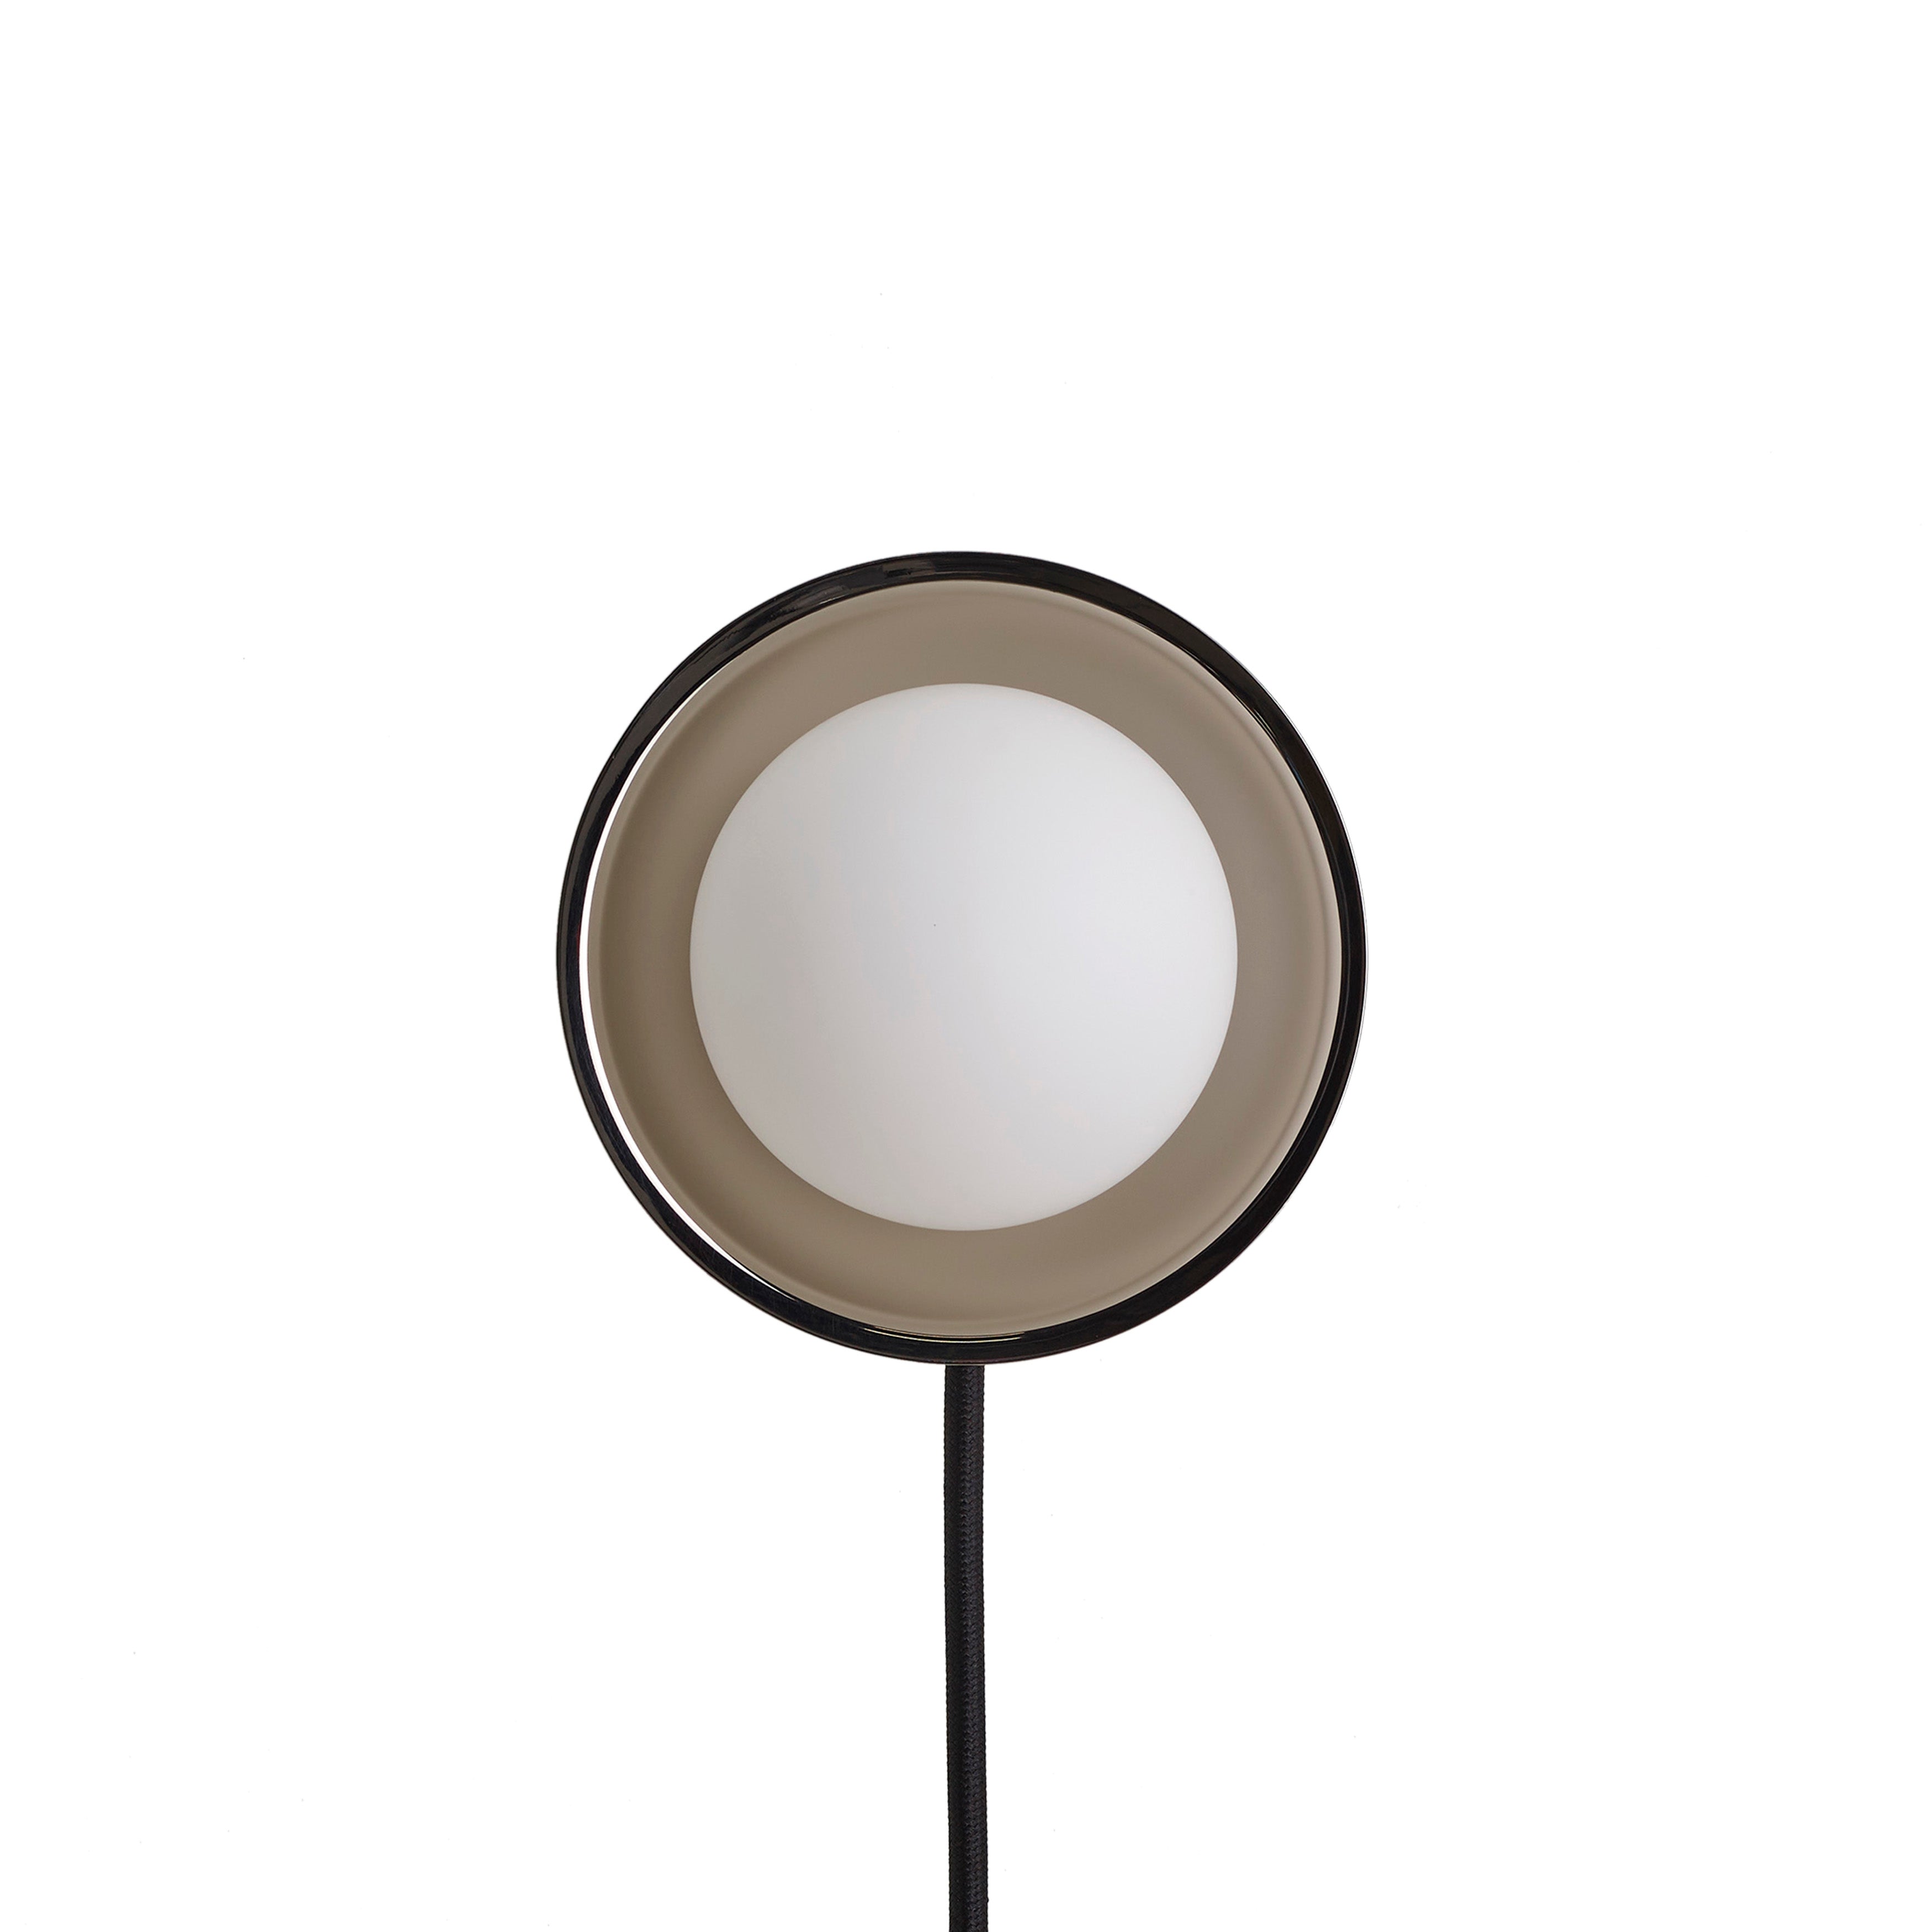 Janed Wall Light with Cable: Satin Graphite + Satin Graphite